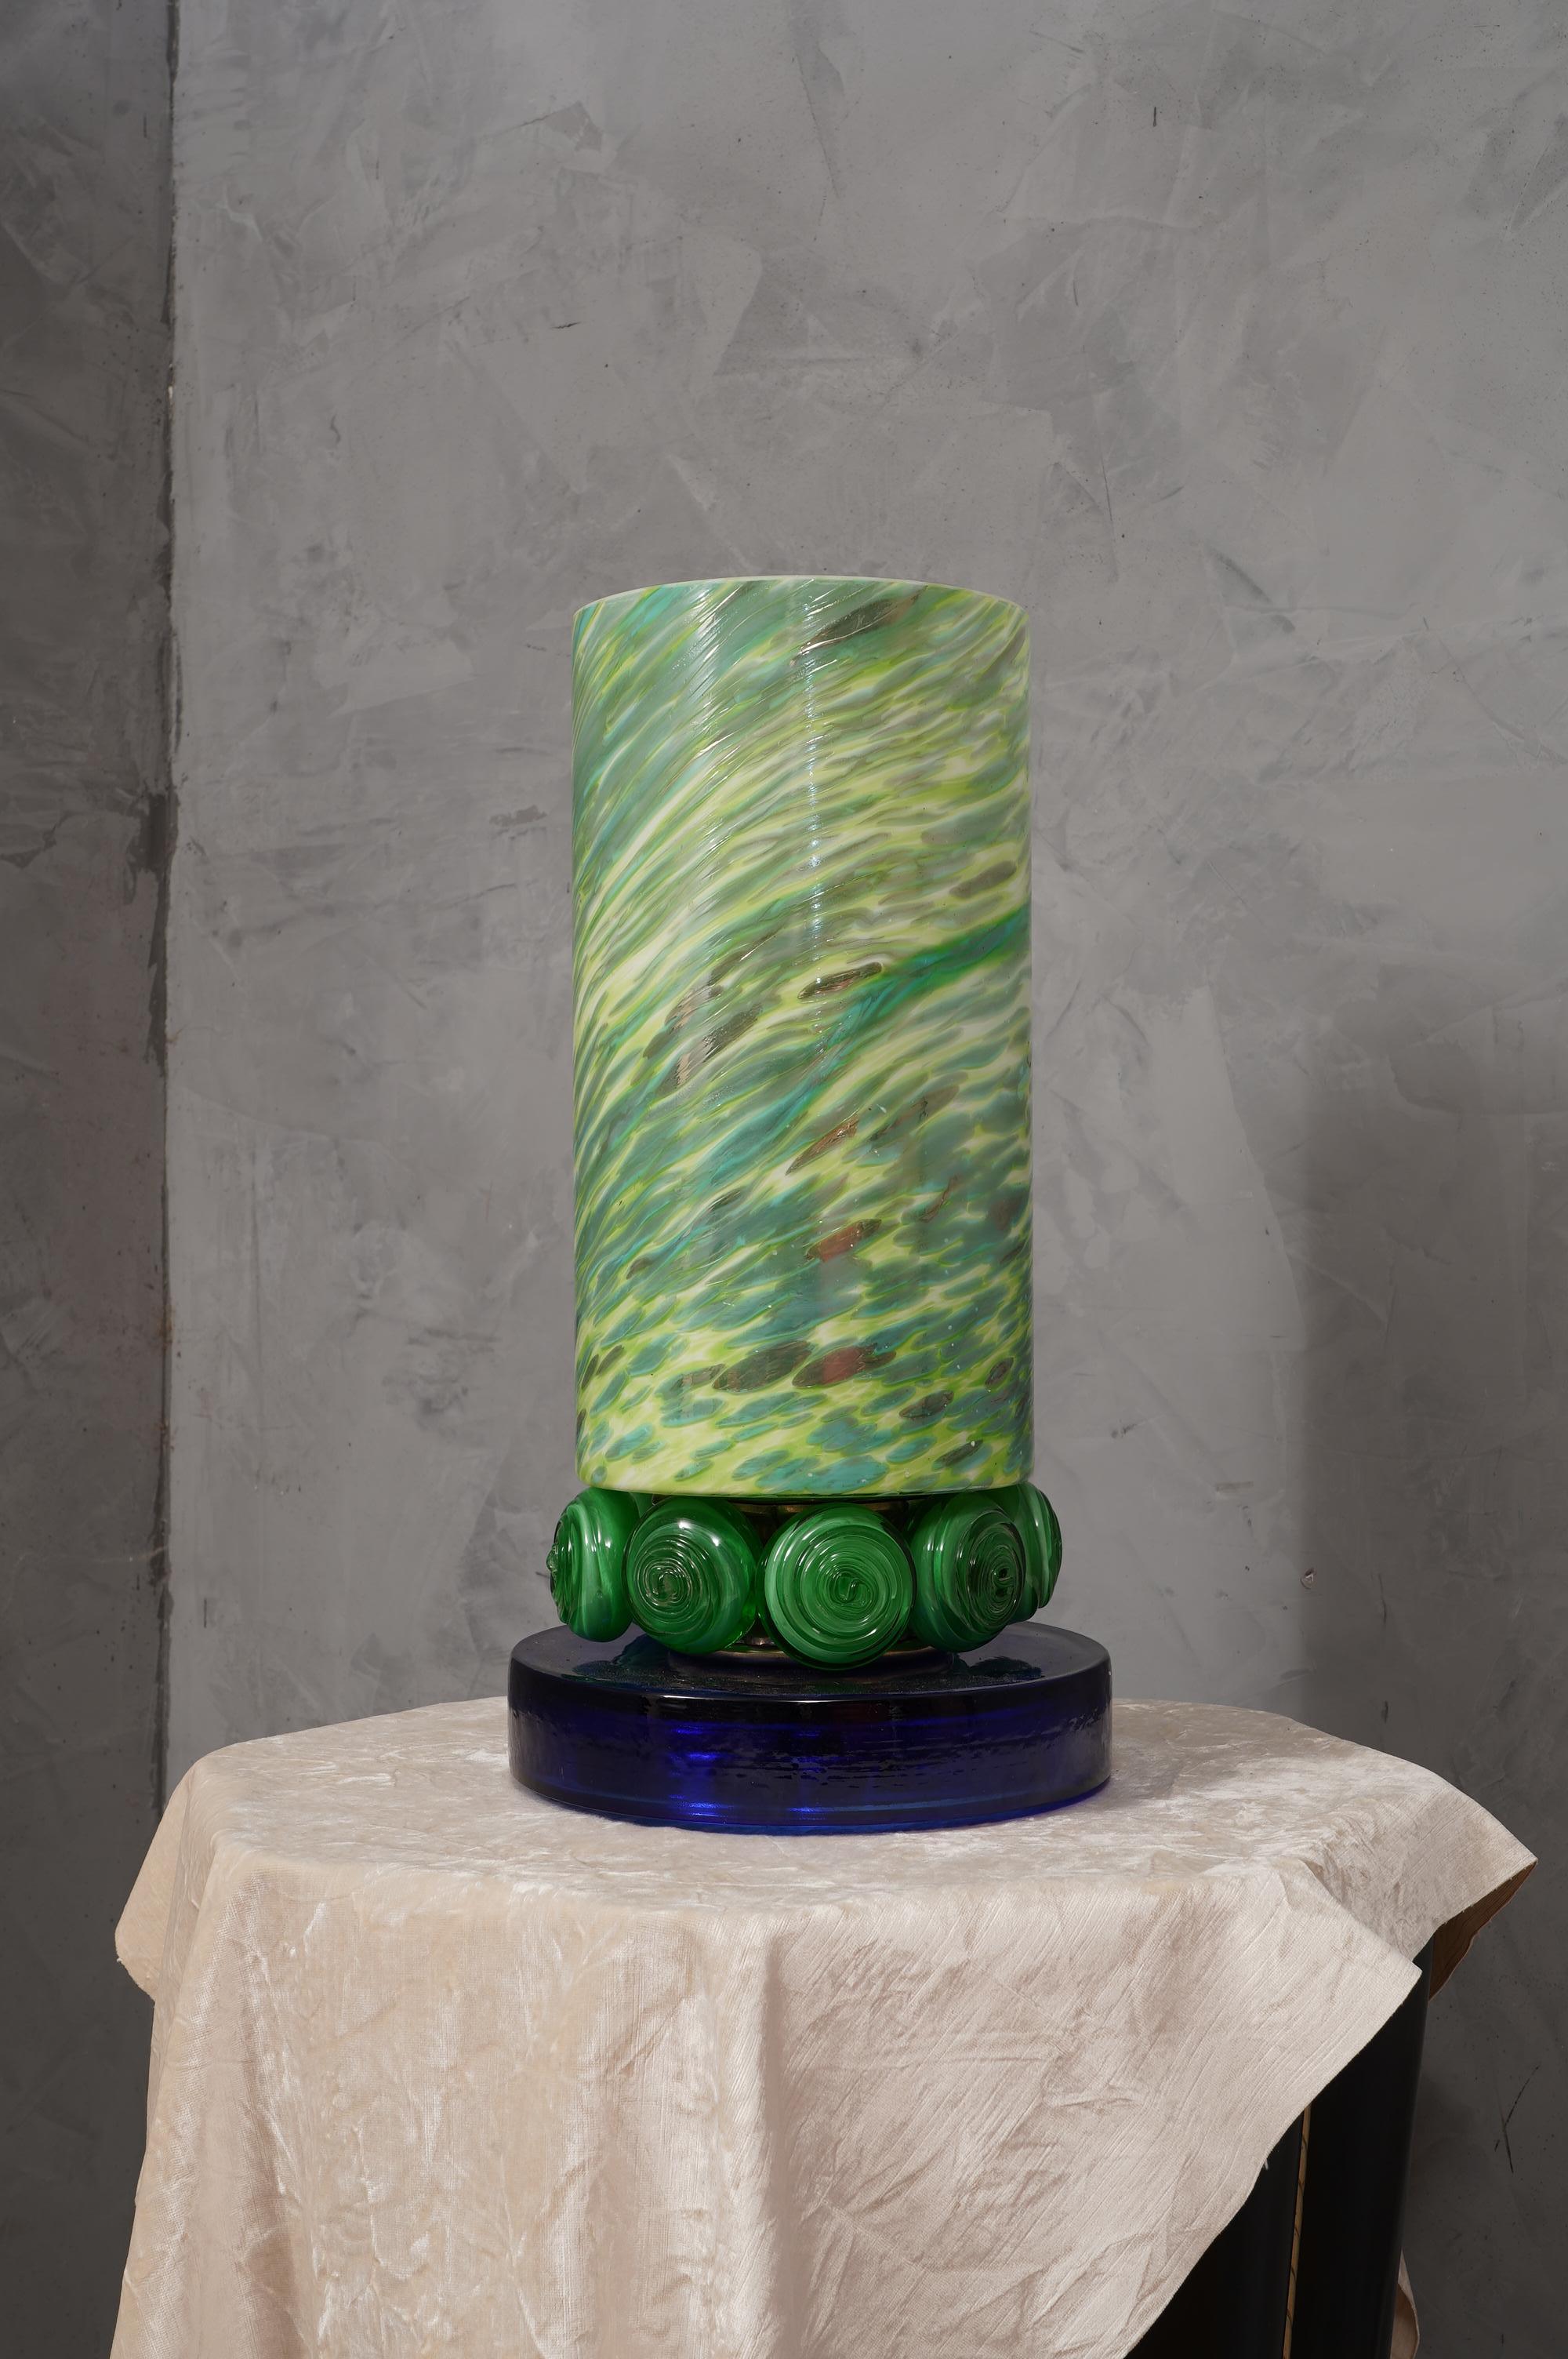 Precious and unique hand-blown Murano white glass, classic but original design with a strong contrast between the large green vase and the blu glass base.

The lamp is characterized by a large green vase with a cylindrical shape, with workings on